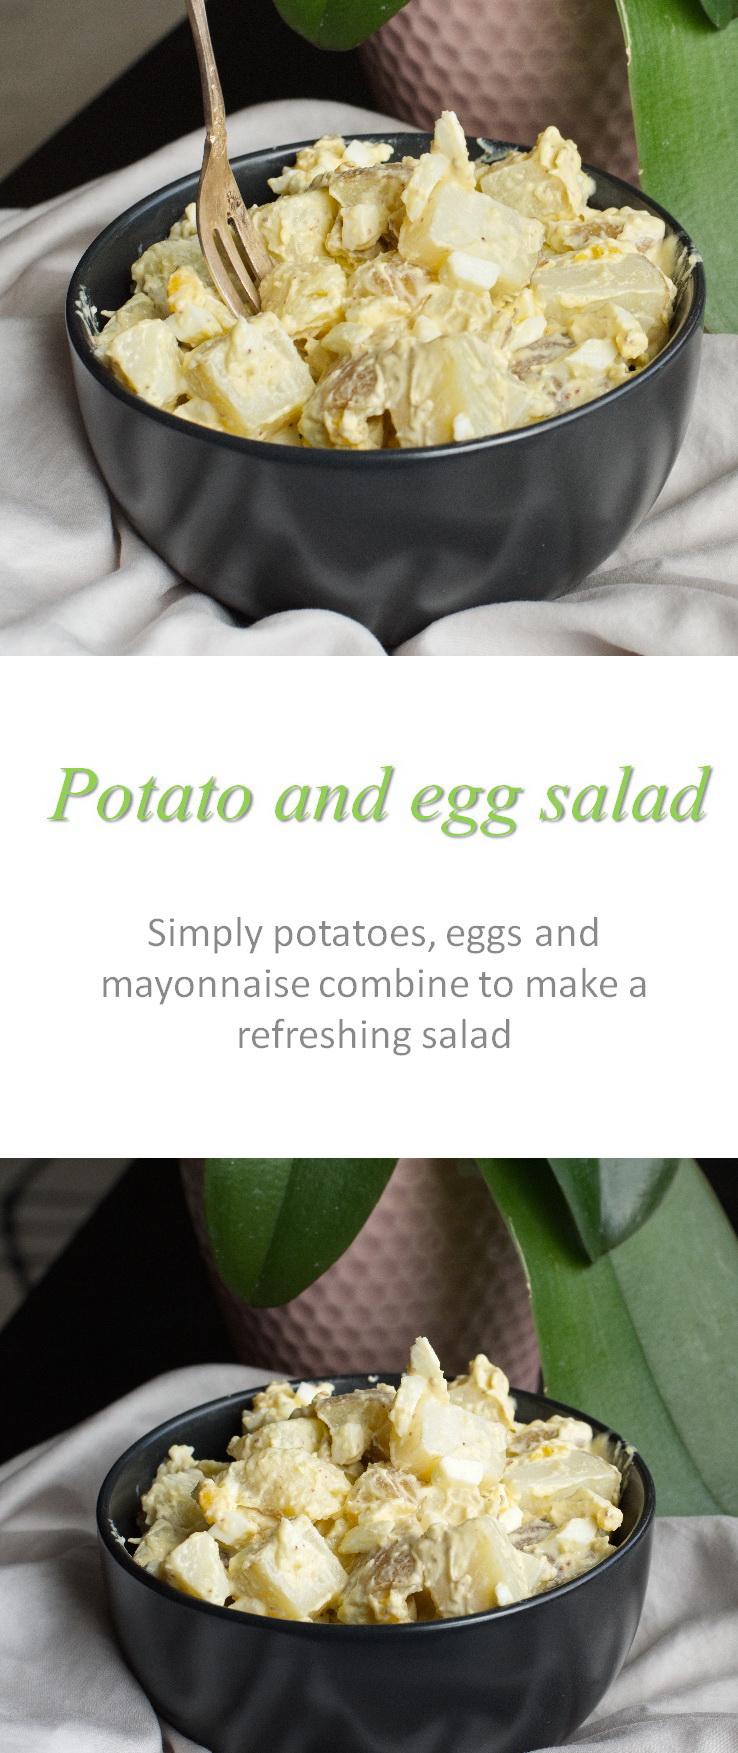 Simple but tasty potato egg salad that anyone can make - make it easy for yourself and make this salad for any occasion! #potatosalad #cookathome #glutenfree #dairyfree